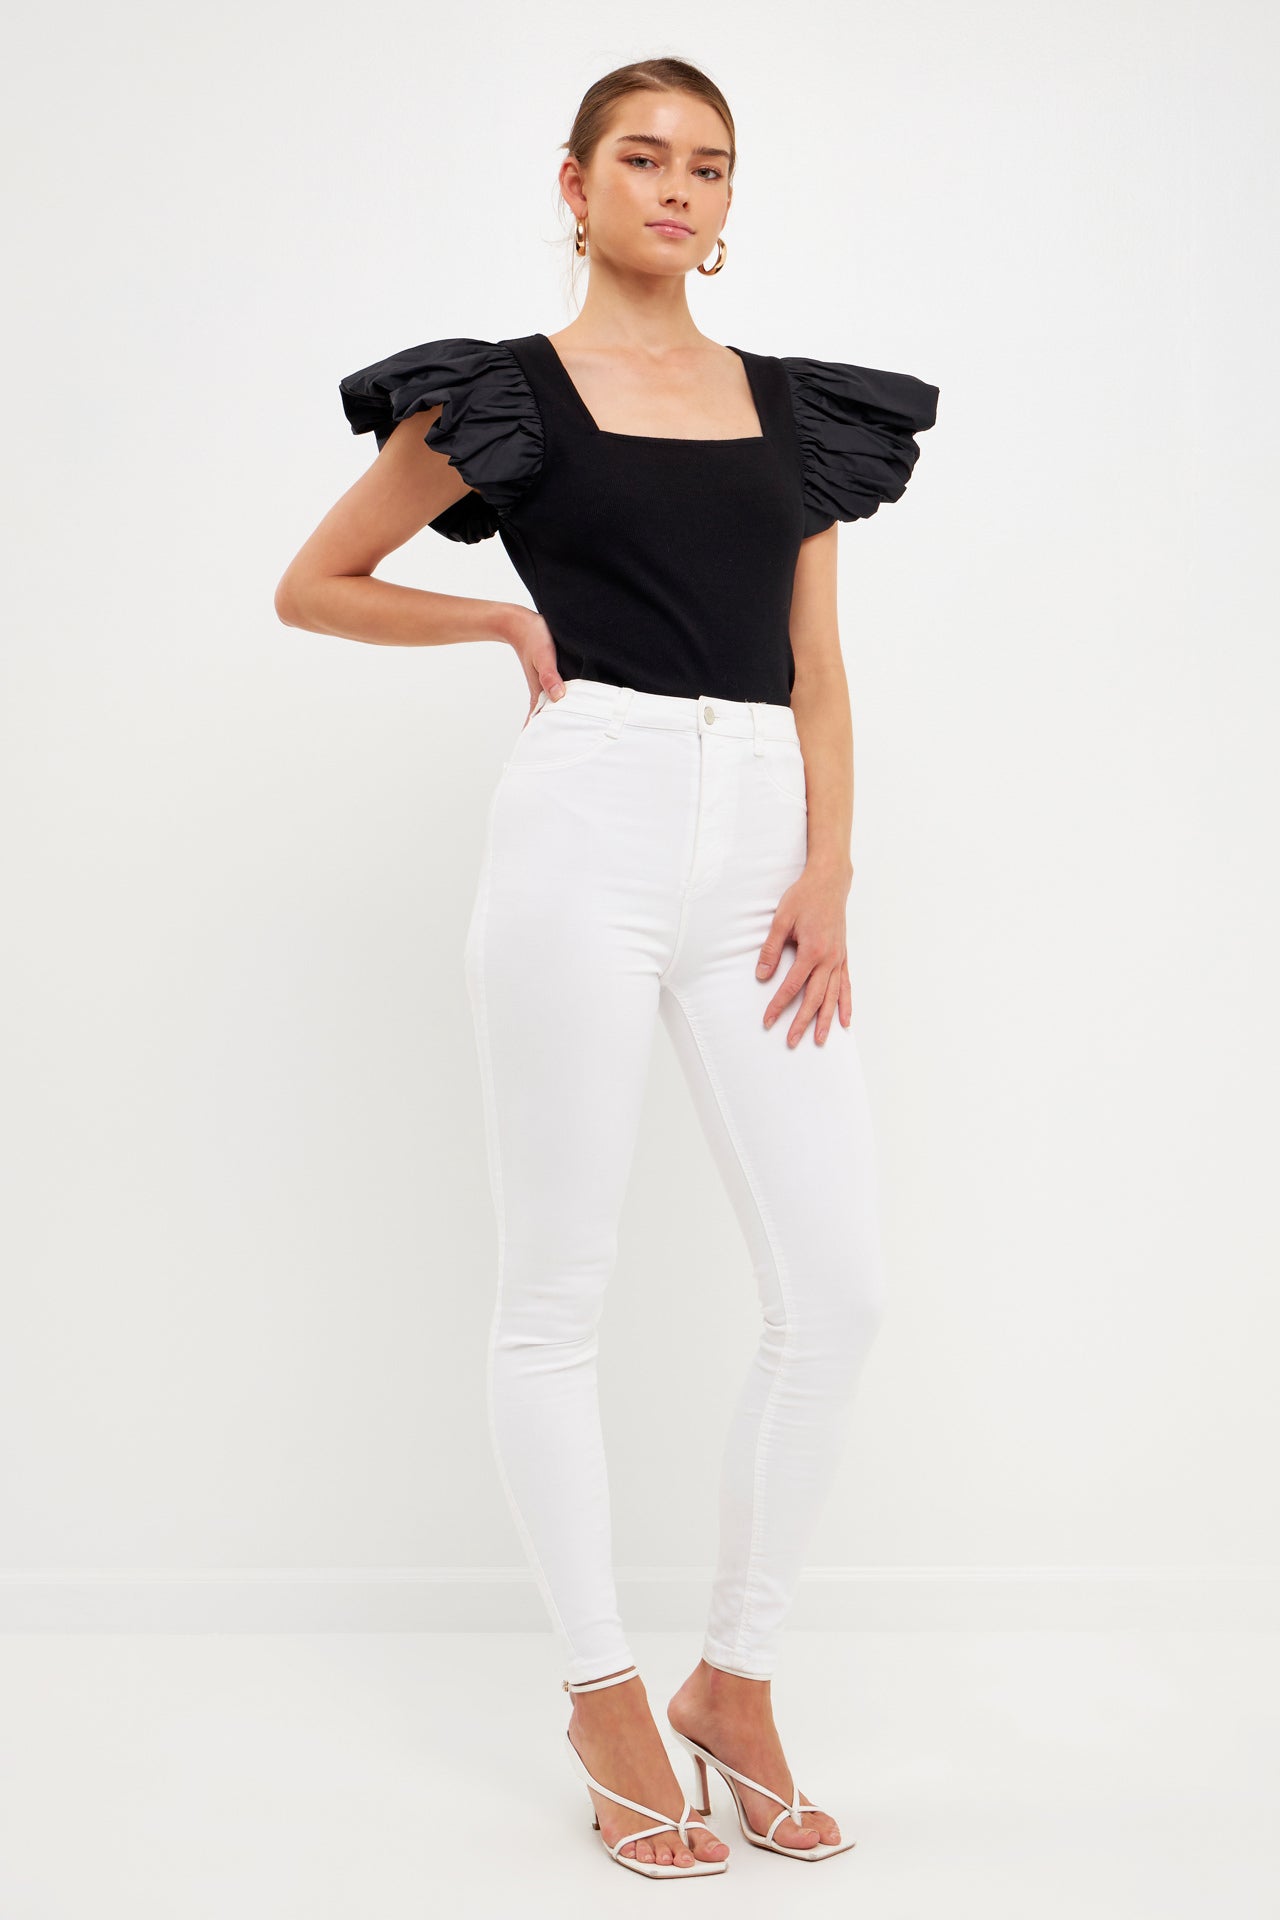 ENDLESS ROSE - Mixed Media Square Neckline Knit Top - TOPS available at Objectrare